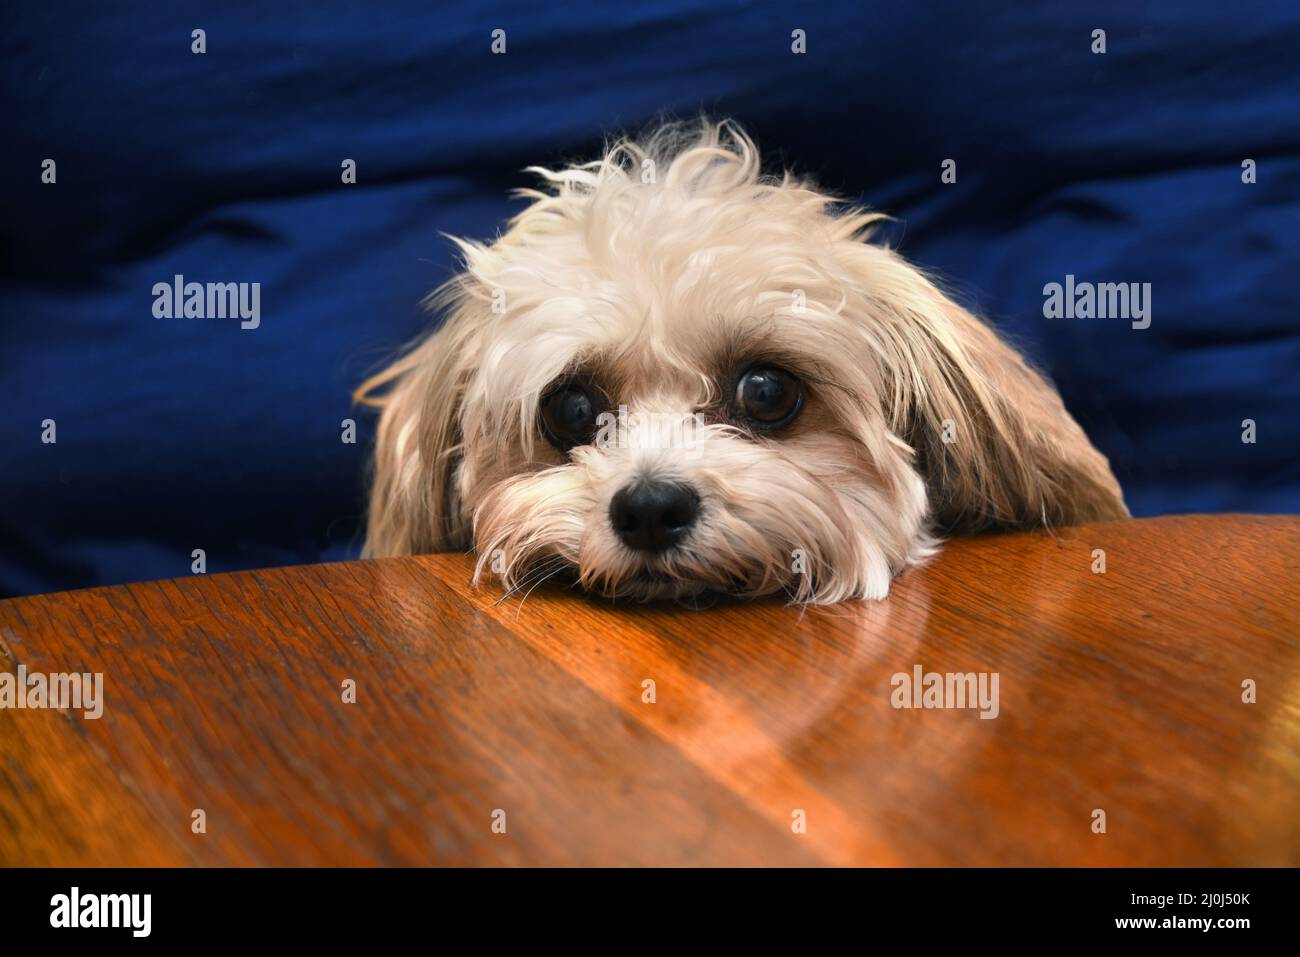 Adorable young silkypoo lays her head on the edge of the table and begs for a hand out.  Closeup shows liquid brown eyes and cute fury face. Stock Photo